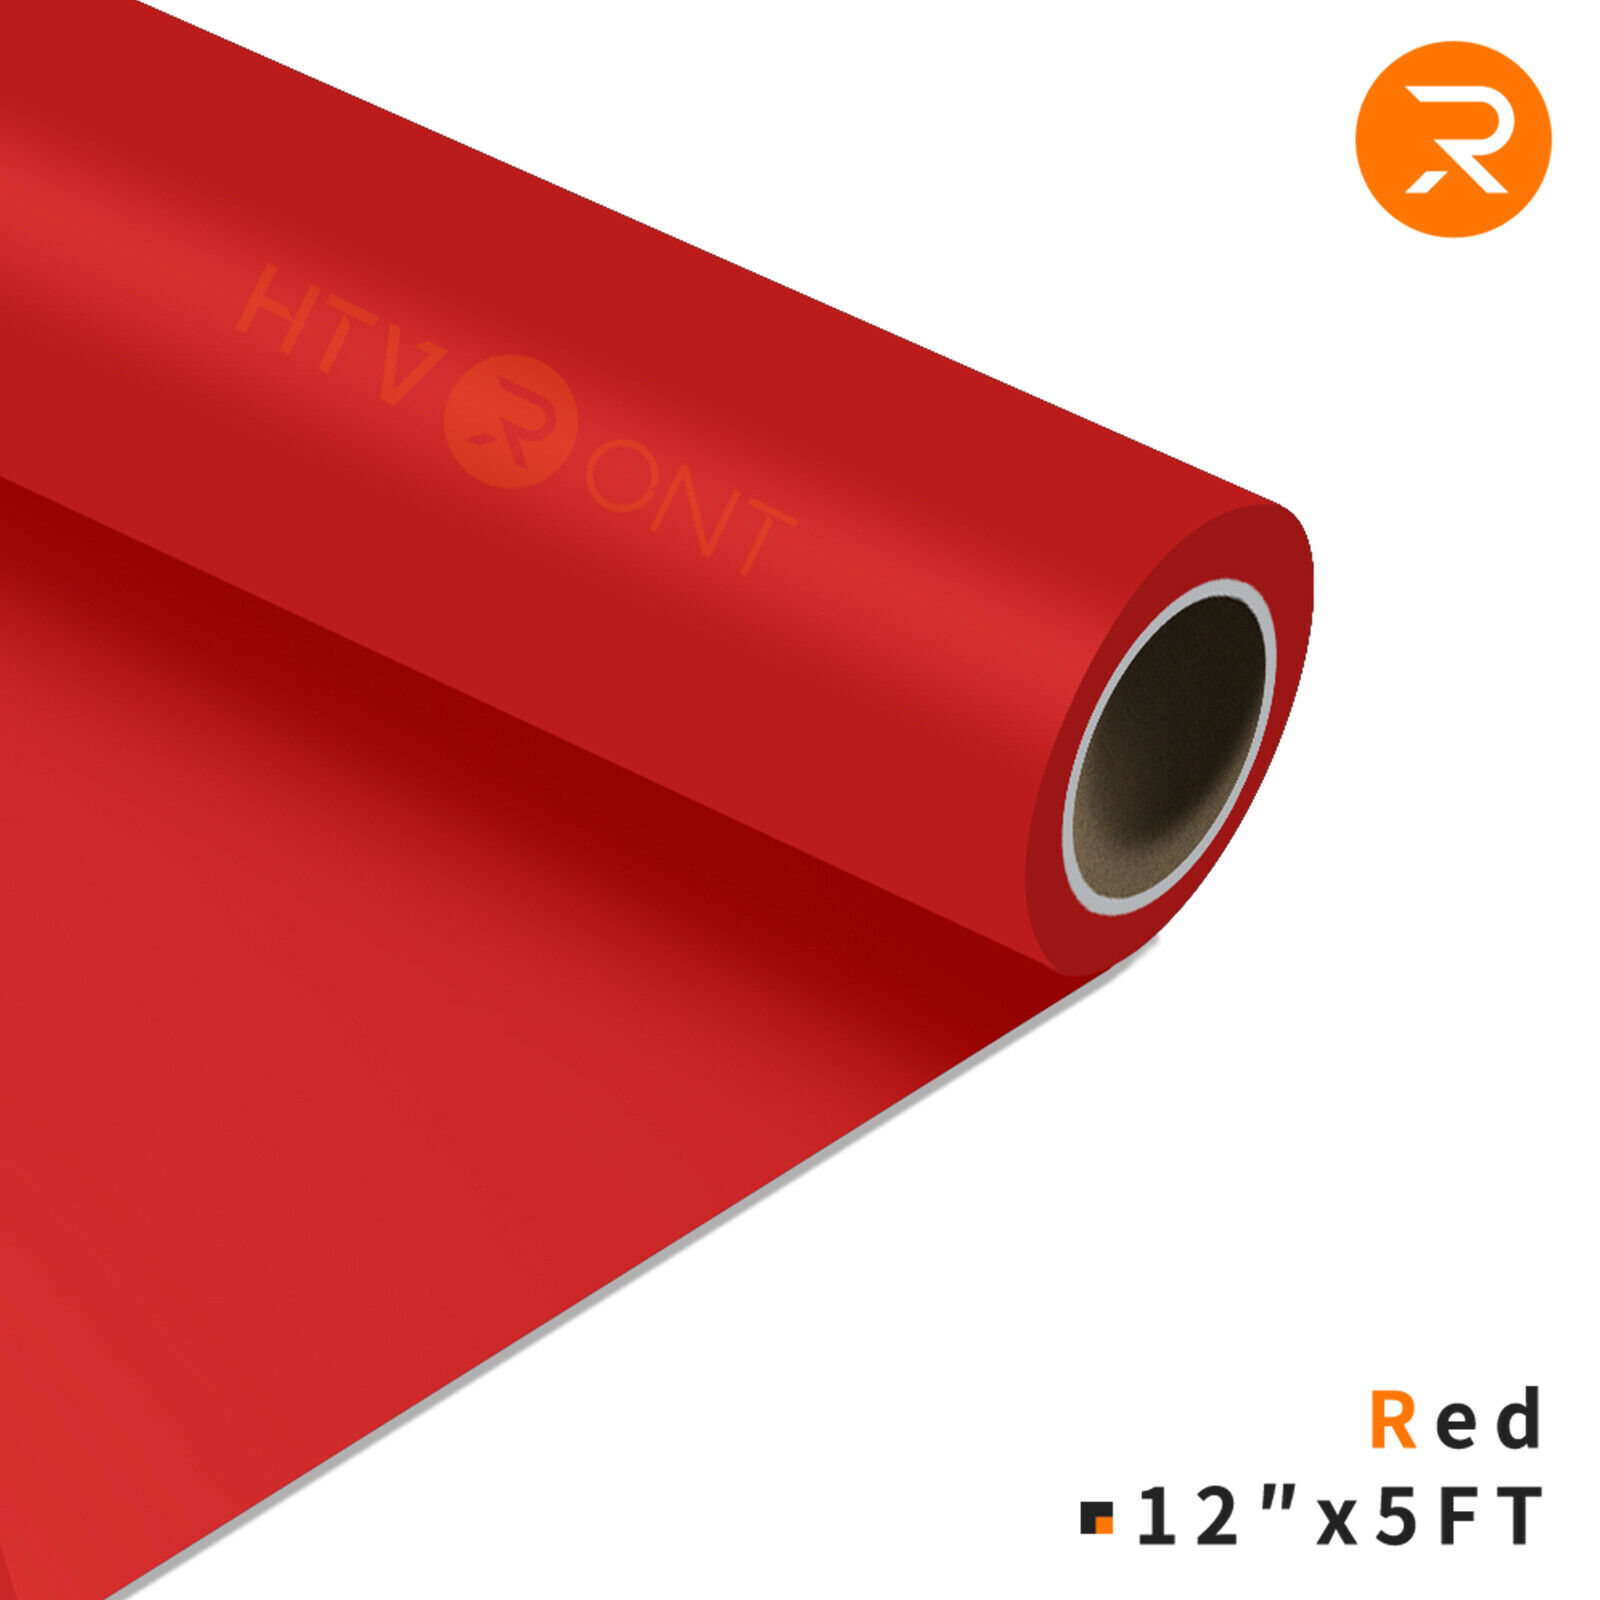 HTVRONT 12 x 5FT Heat Transfer Vinyl Red HTV Rolls for T-Shirts, Clothing  and Textiles, Easy Transfers 